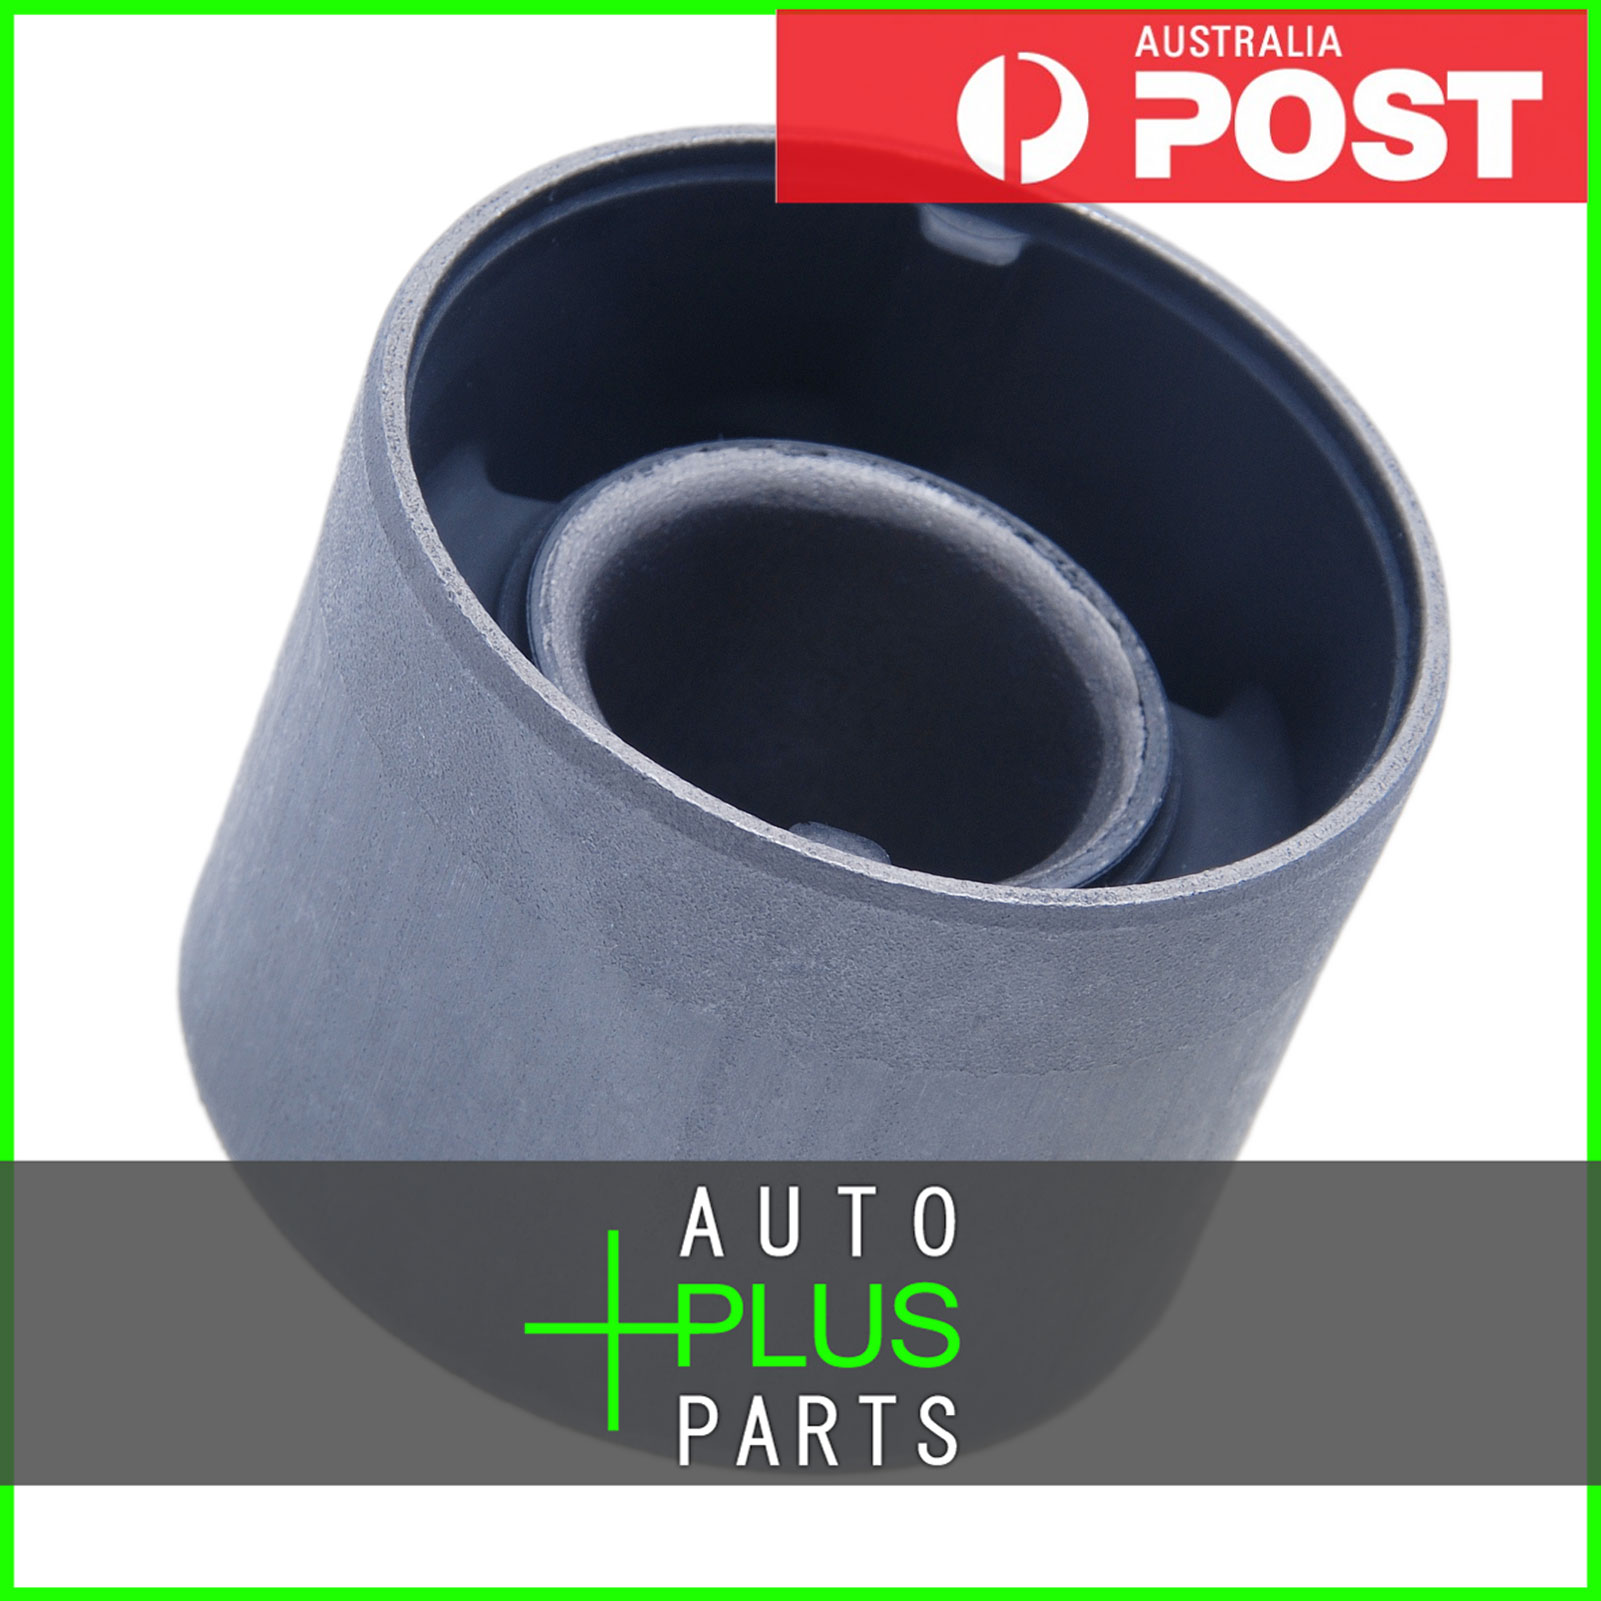 Fits NISSAN PATHFINDER R52 2012- - REAR CROSSMEMBER BUSHING Product Photo